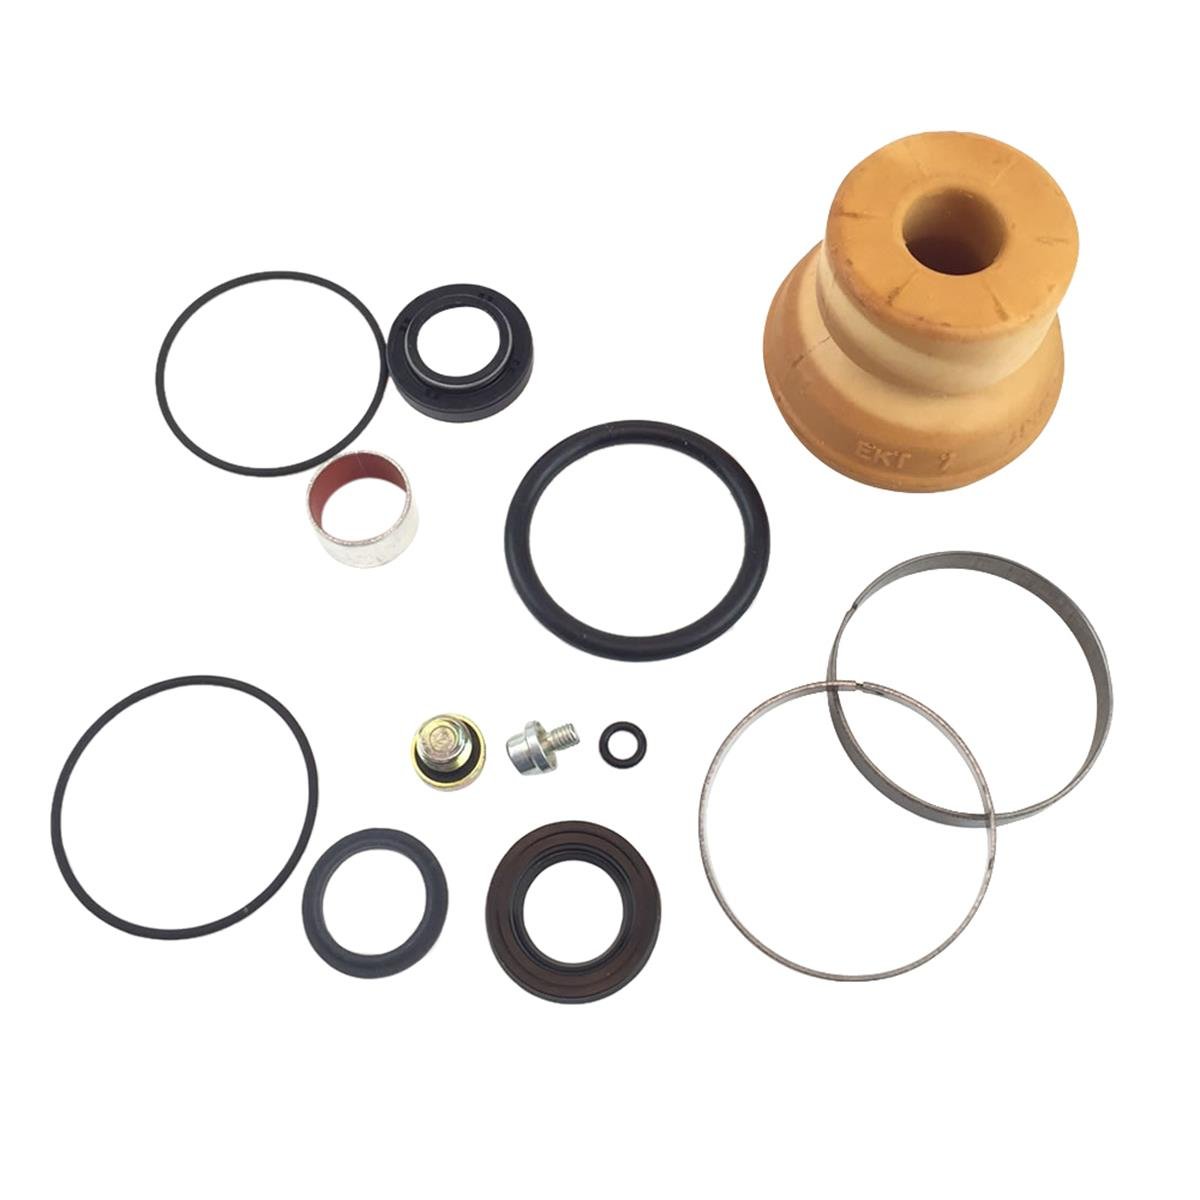 WP Rear Shock Rebuild Kit with Bump Stop PDS KTM EXC/EXC-F 08-16